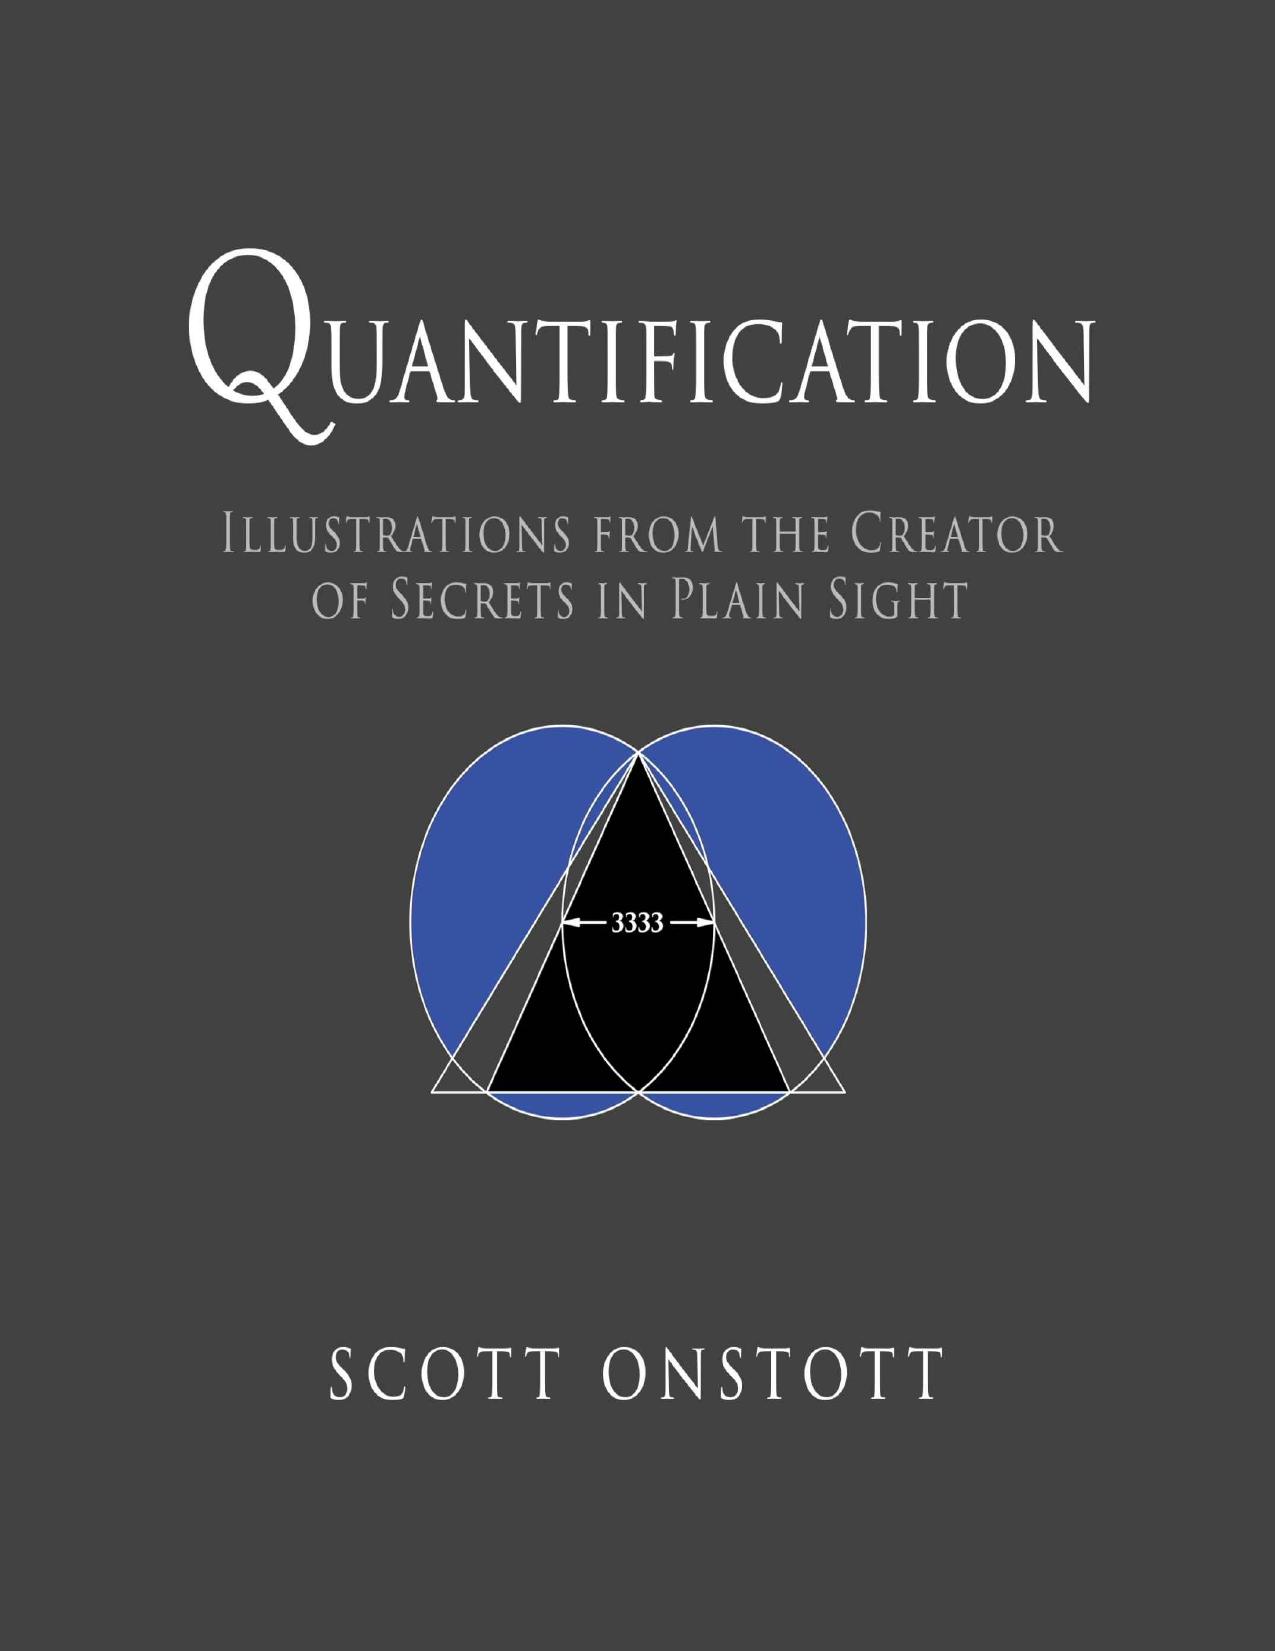 Quantification: Illustrations from the Creator of Secrets In Plain Sight - PDFDrive.com